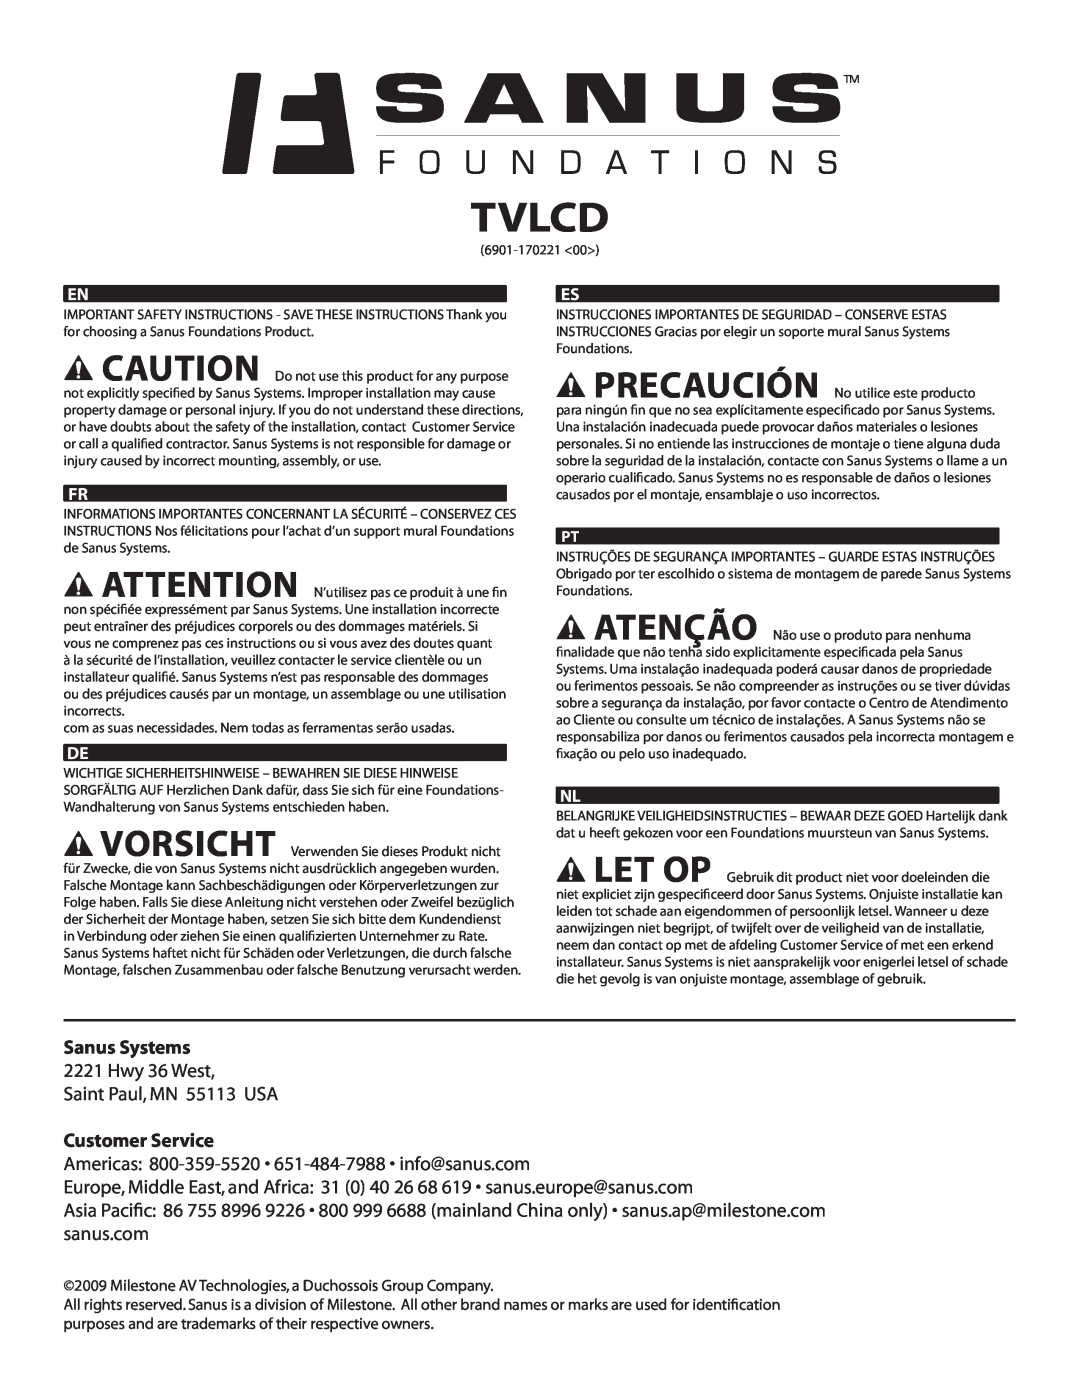 Sanus Systems TVLCD important safety instructions Tvlcd, Sanus Systems, Customer Service 